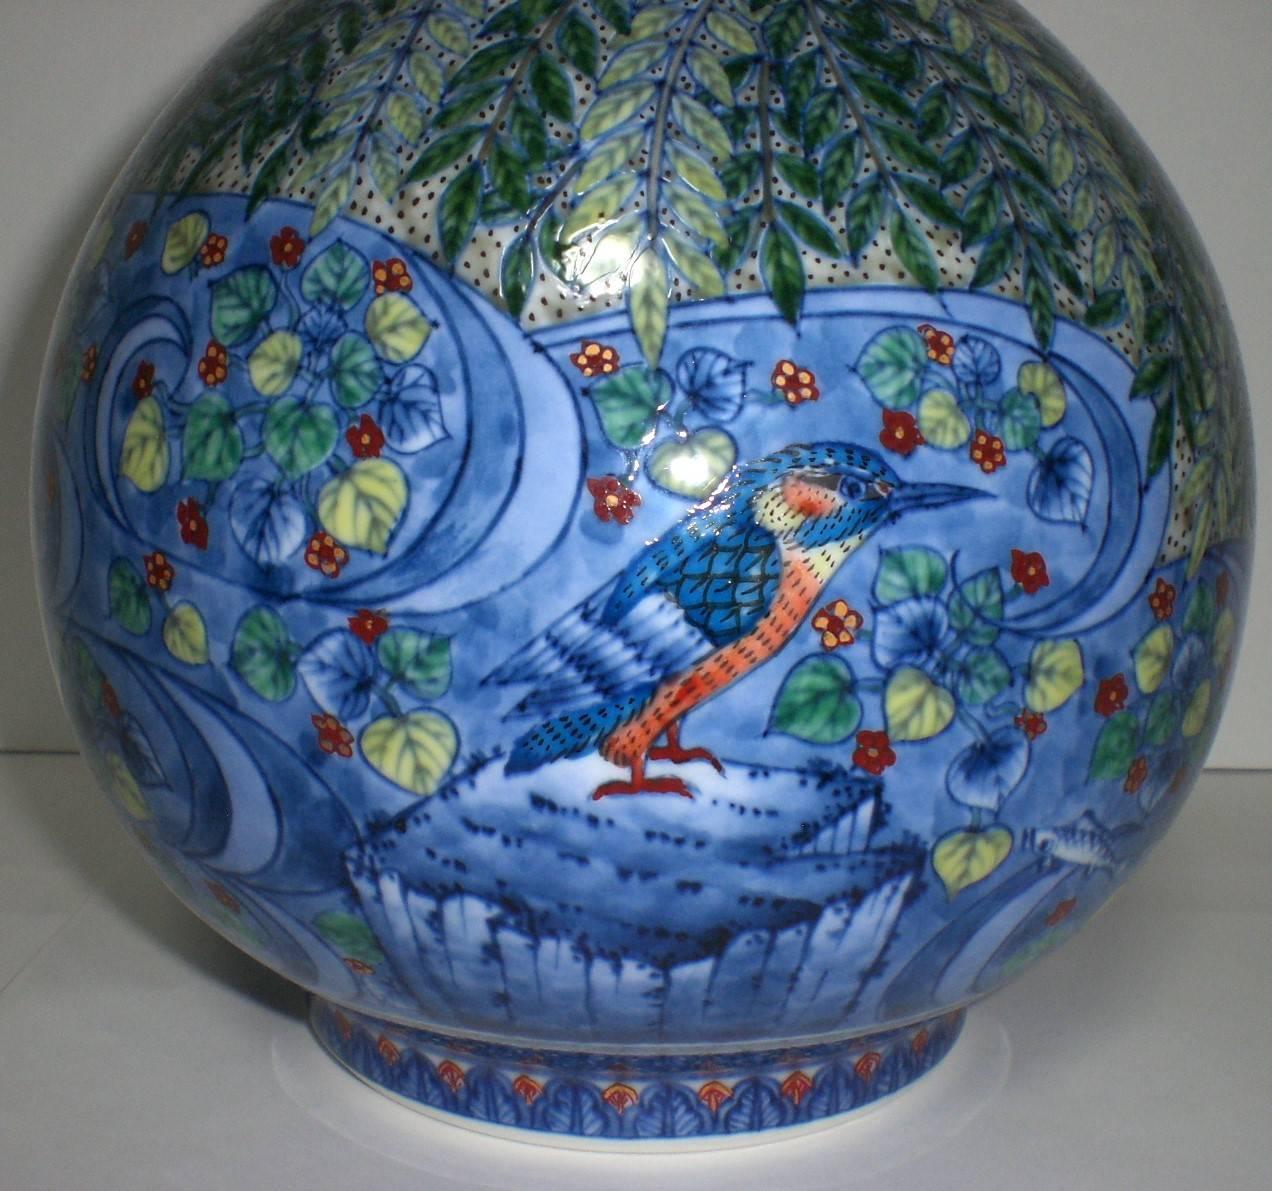 Exceptional museum quality Japanese contemporary decorative porcelain vase boasting a beautifully shaped large double gourd body in blue and green, a masterpiece by a master porcelain artist of the Imari-Arita region of Japan’s southern island of